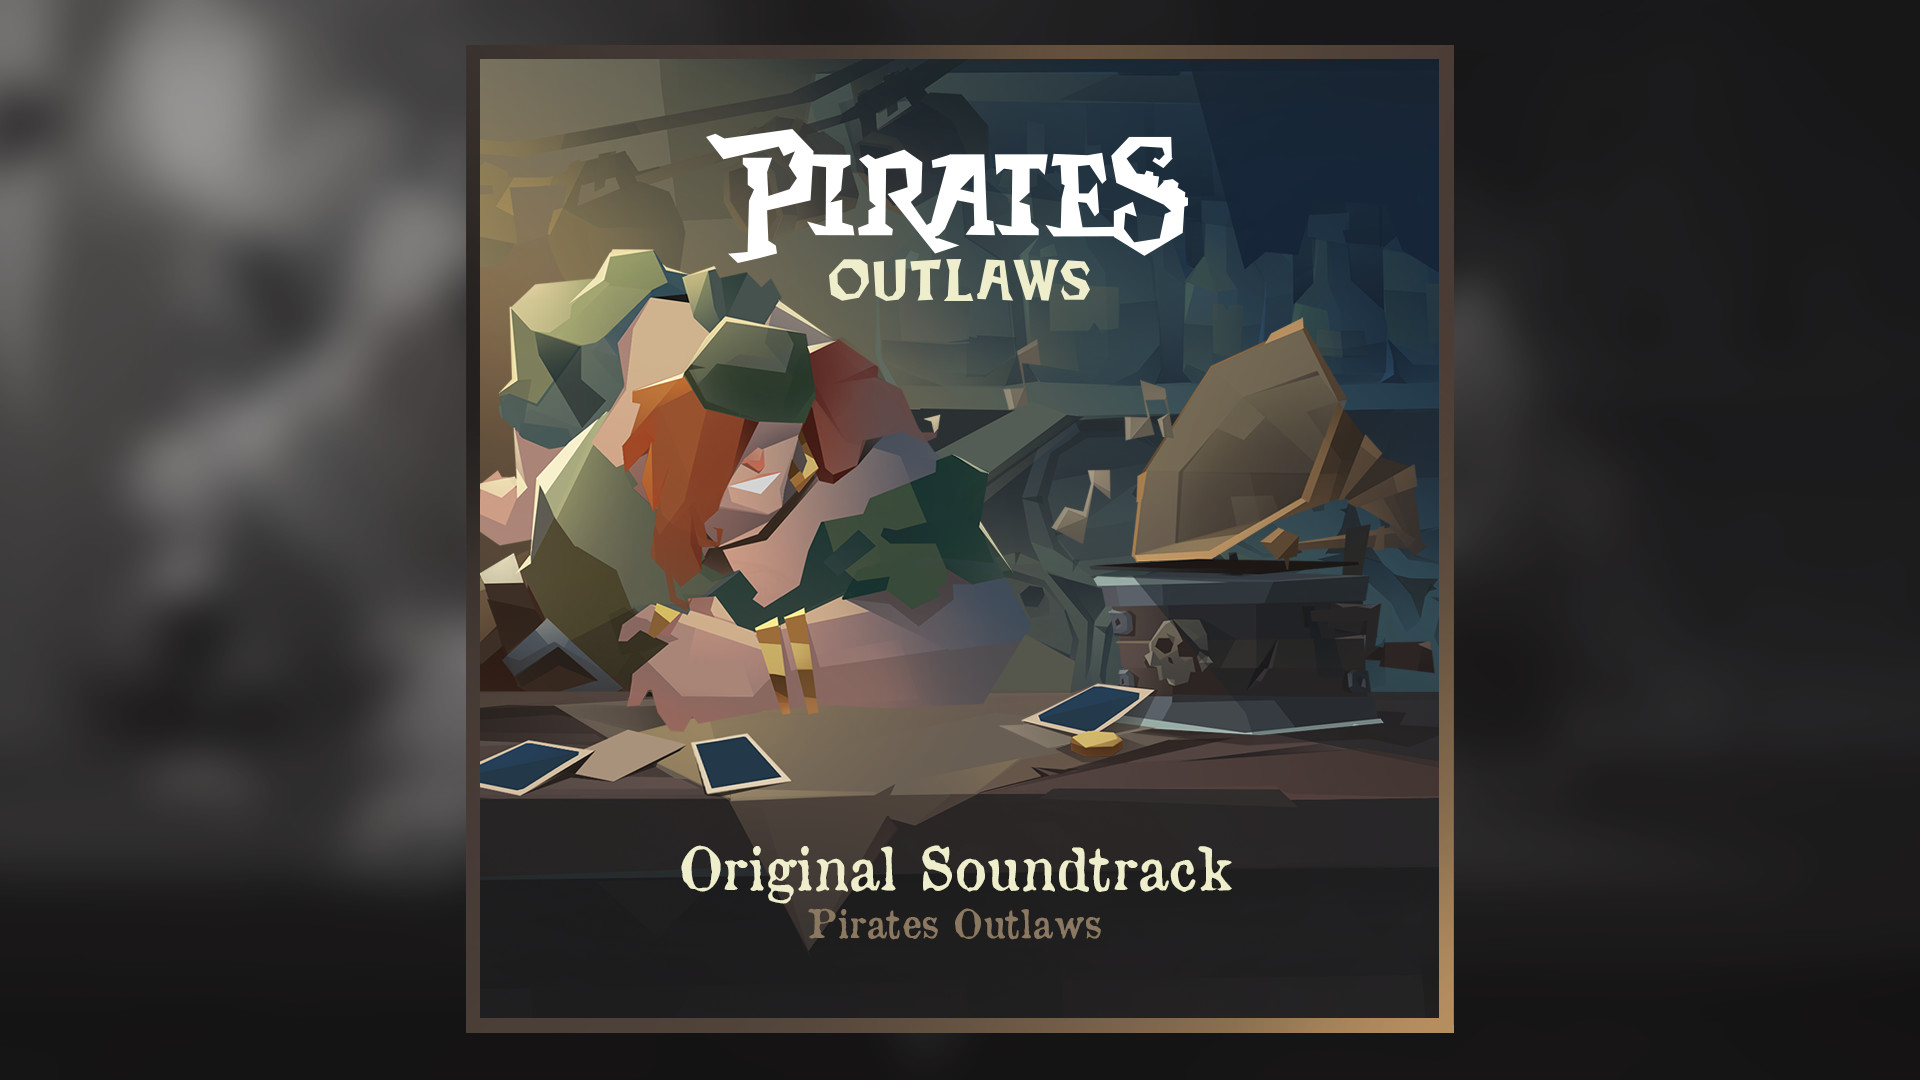 Pirates Outlaws Soundtrack Featured Screenshot #1